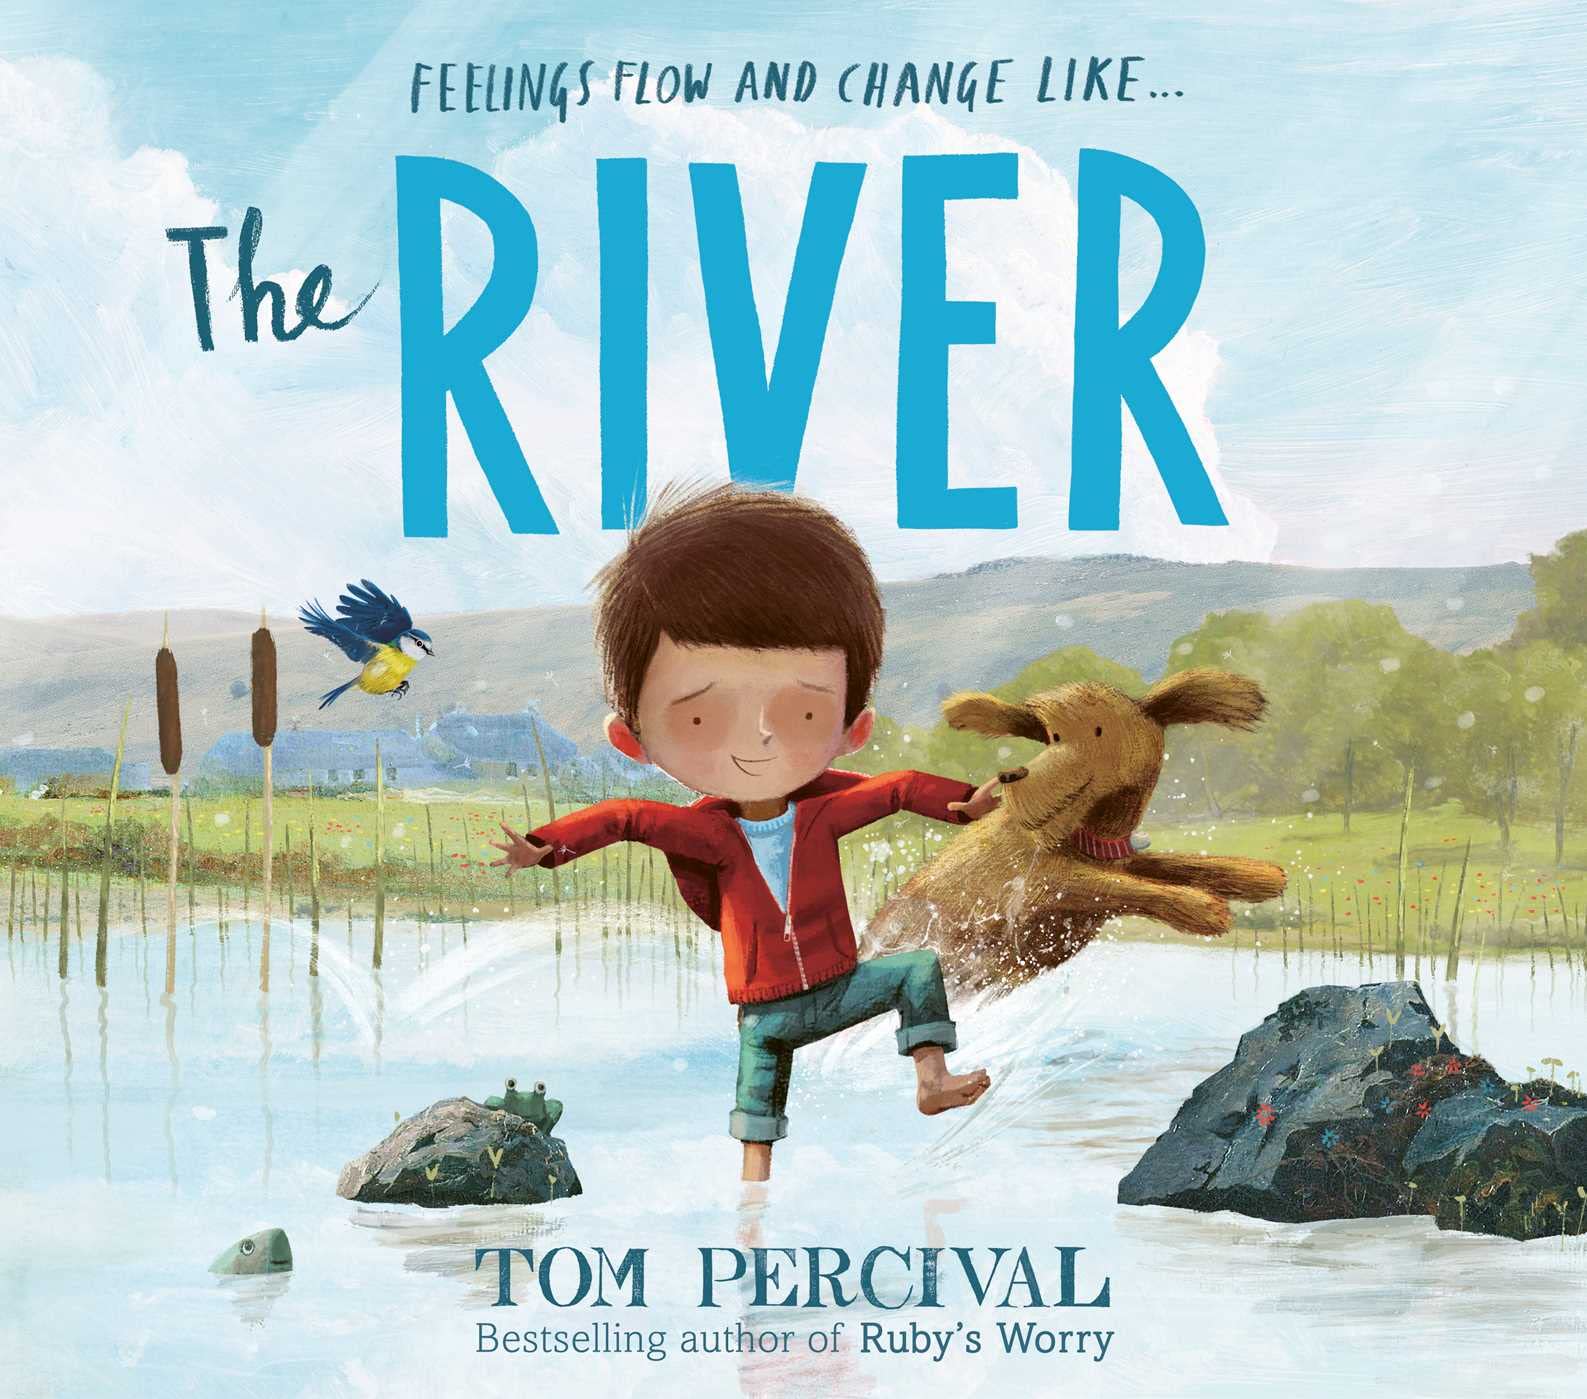 The River: A Powerful Book about Feelings - Tom Percival